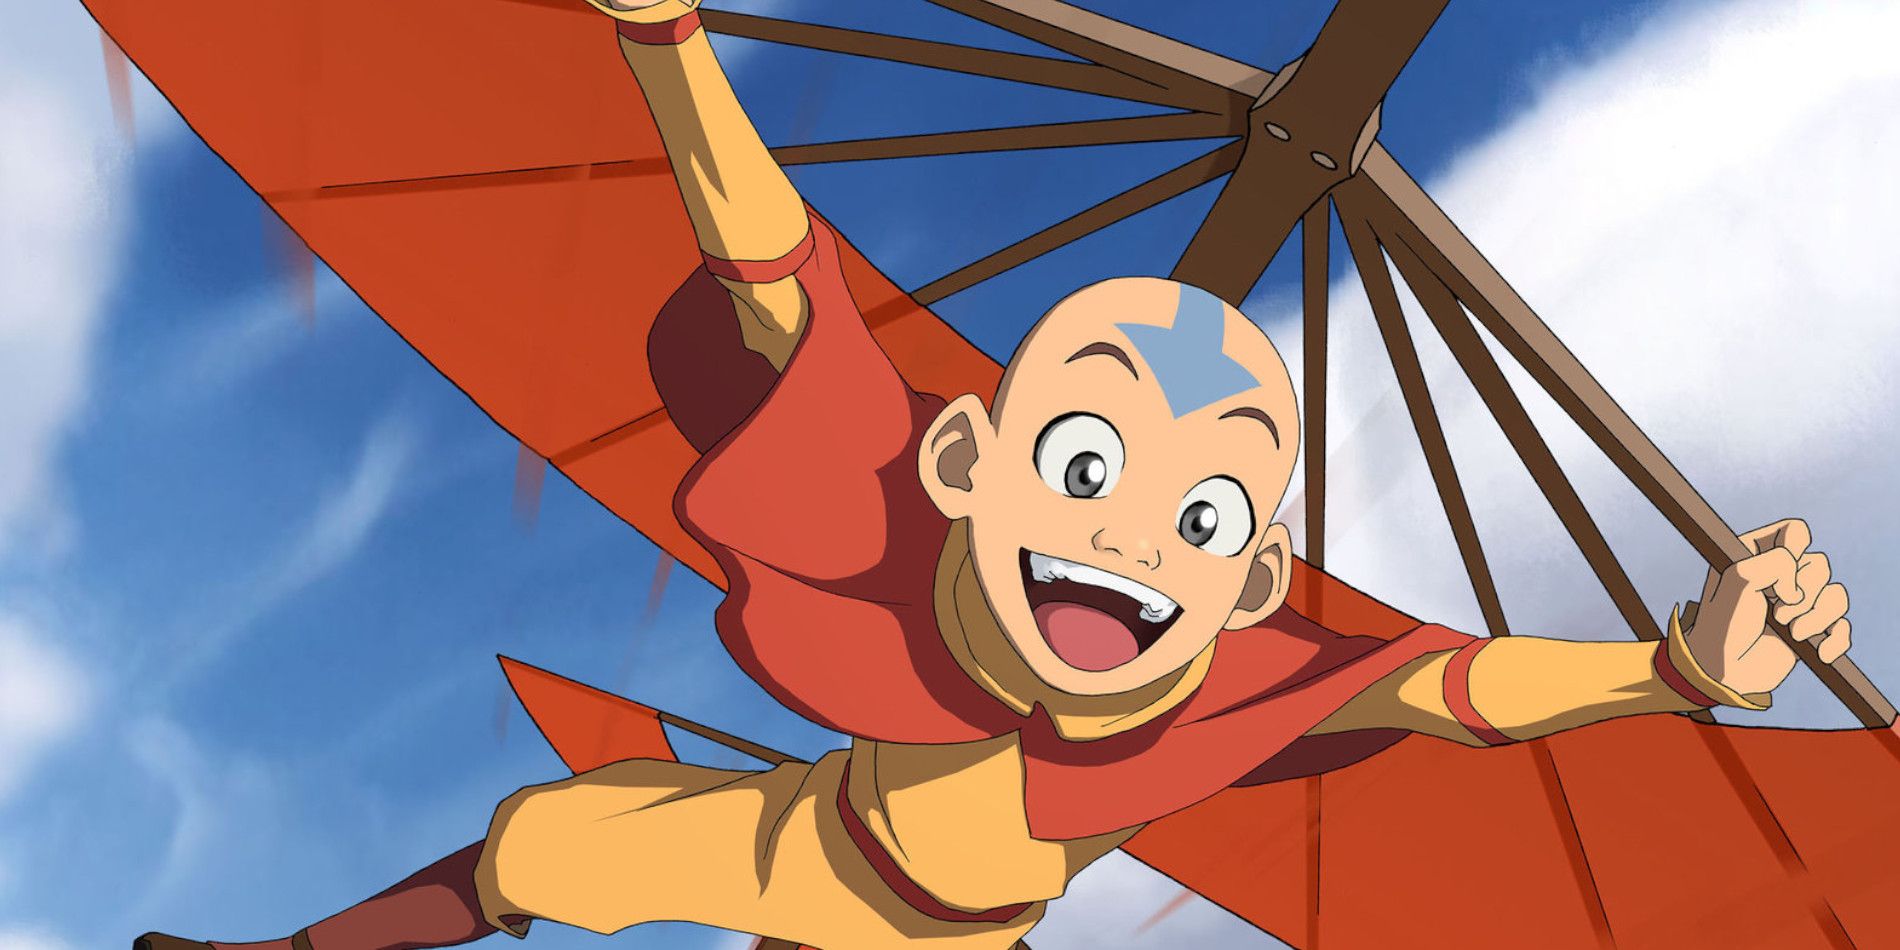 Aang from Avatar: The Last Airbender